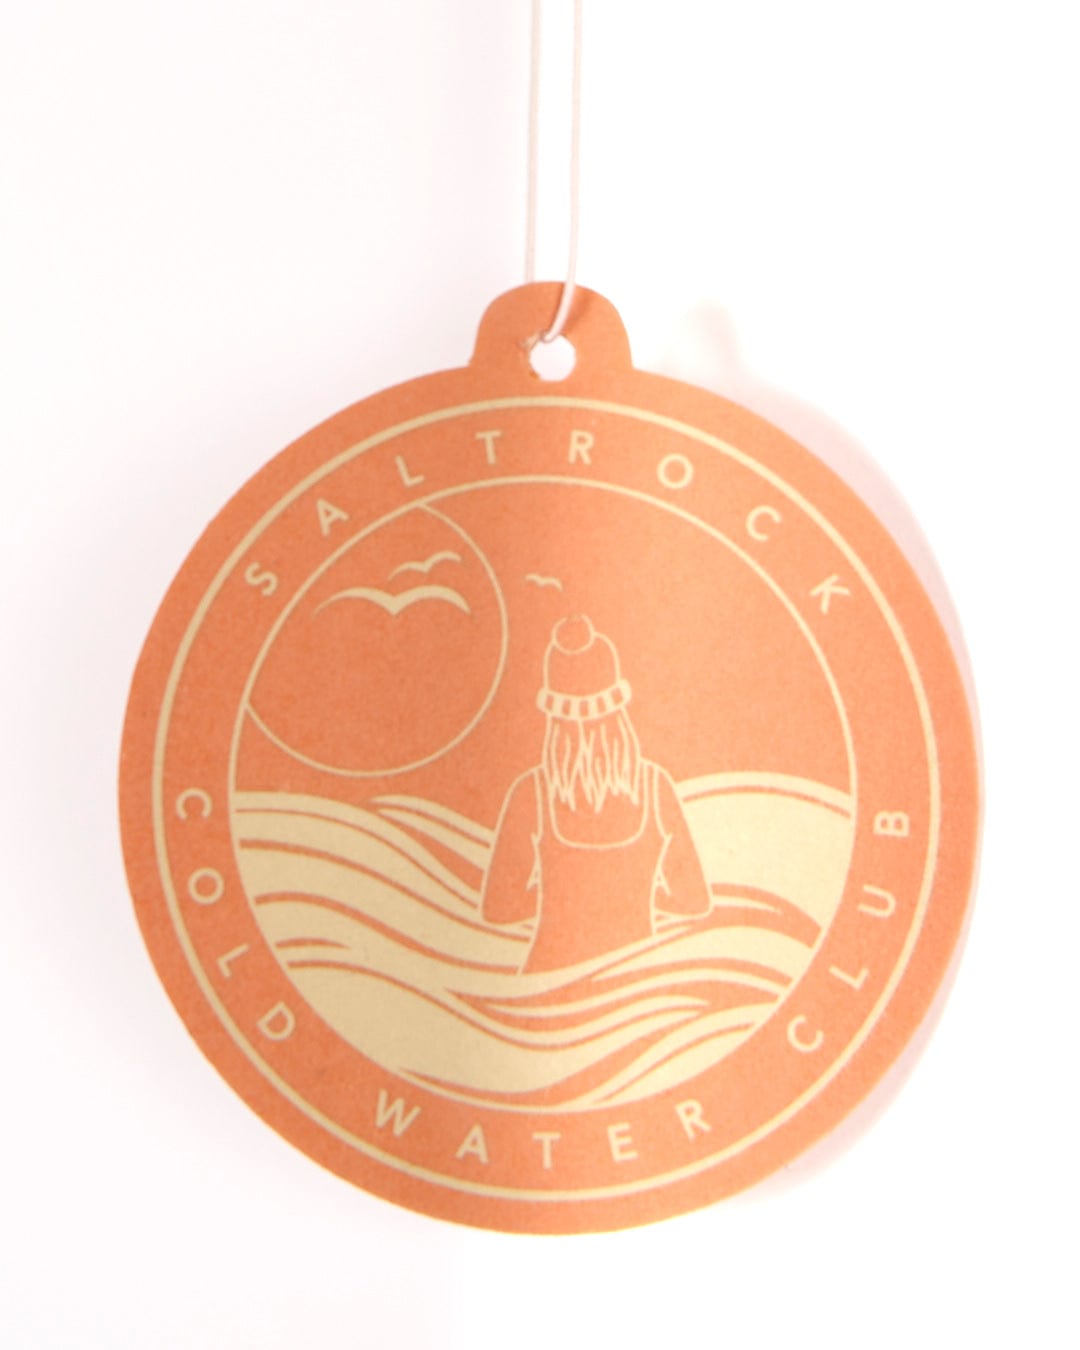 A Cold Water Club scented air freshener with an image of a woman in the water. (Brand Name: Saltrock)